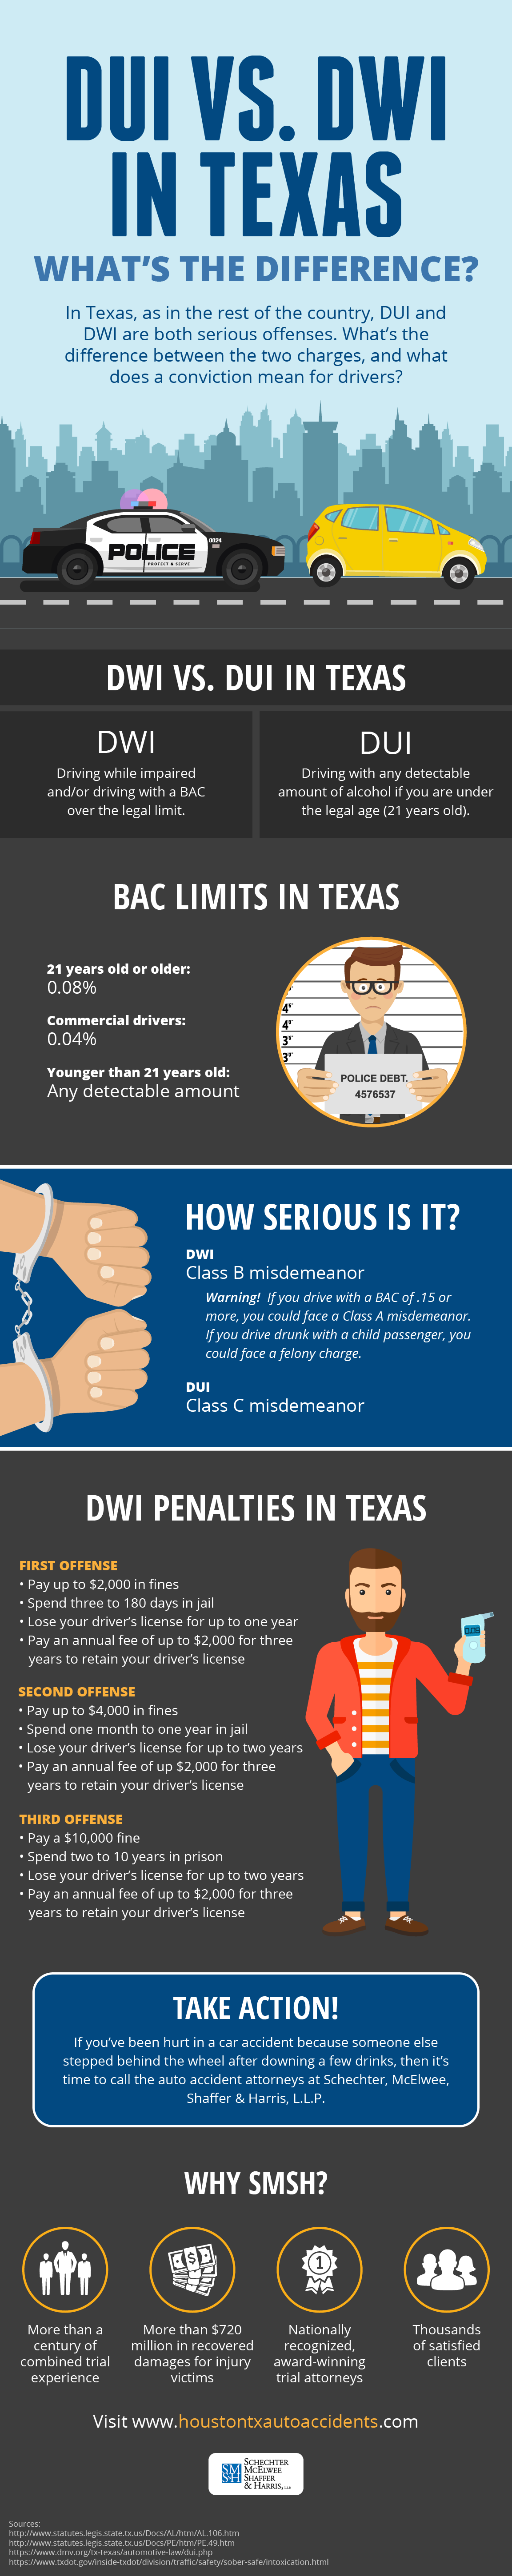 DUI vs. DWI in Texas Infographic